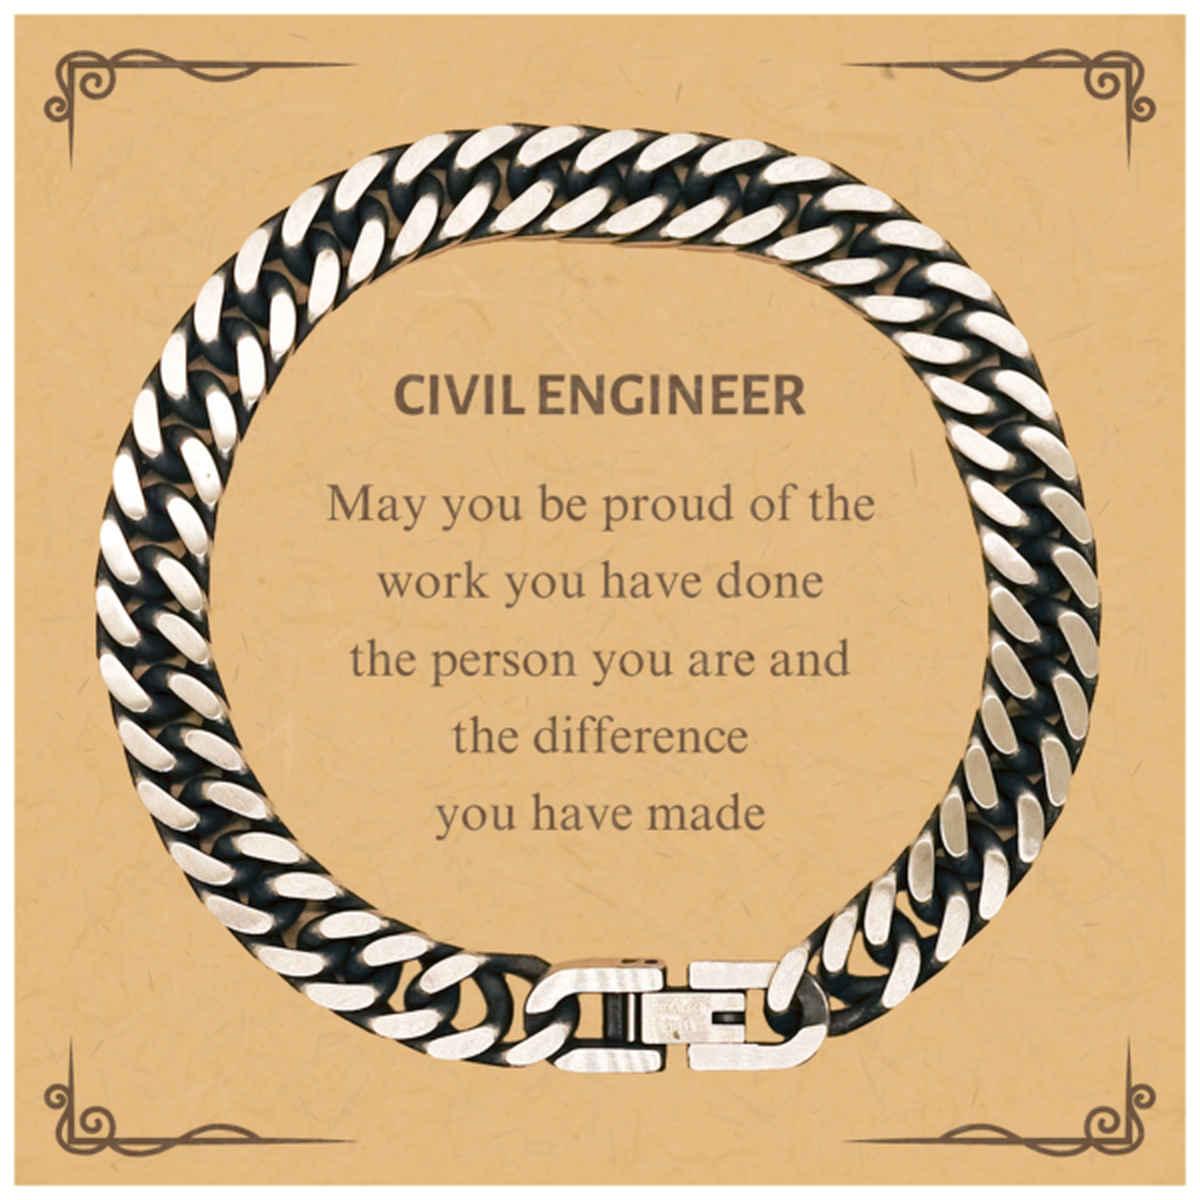 Civil Engineer May you be proud of the work you have done, Retirement Civil Engineer Cuban Link Chain Bracelet for Colleague Appreciation Gifts Amazing for Civil Engineer